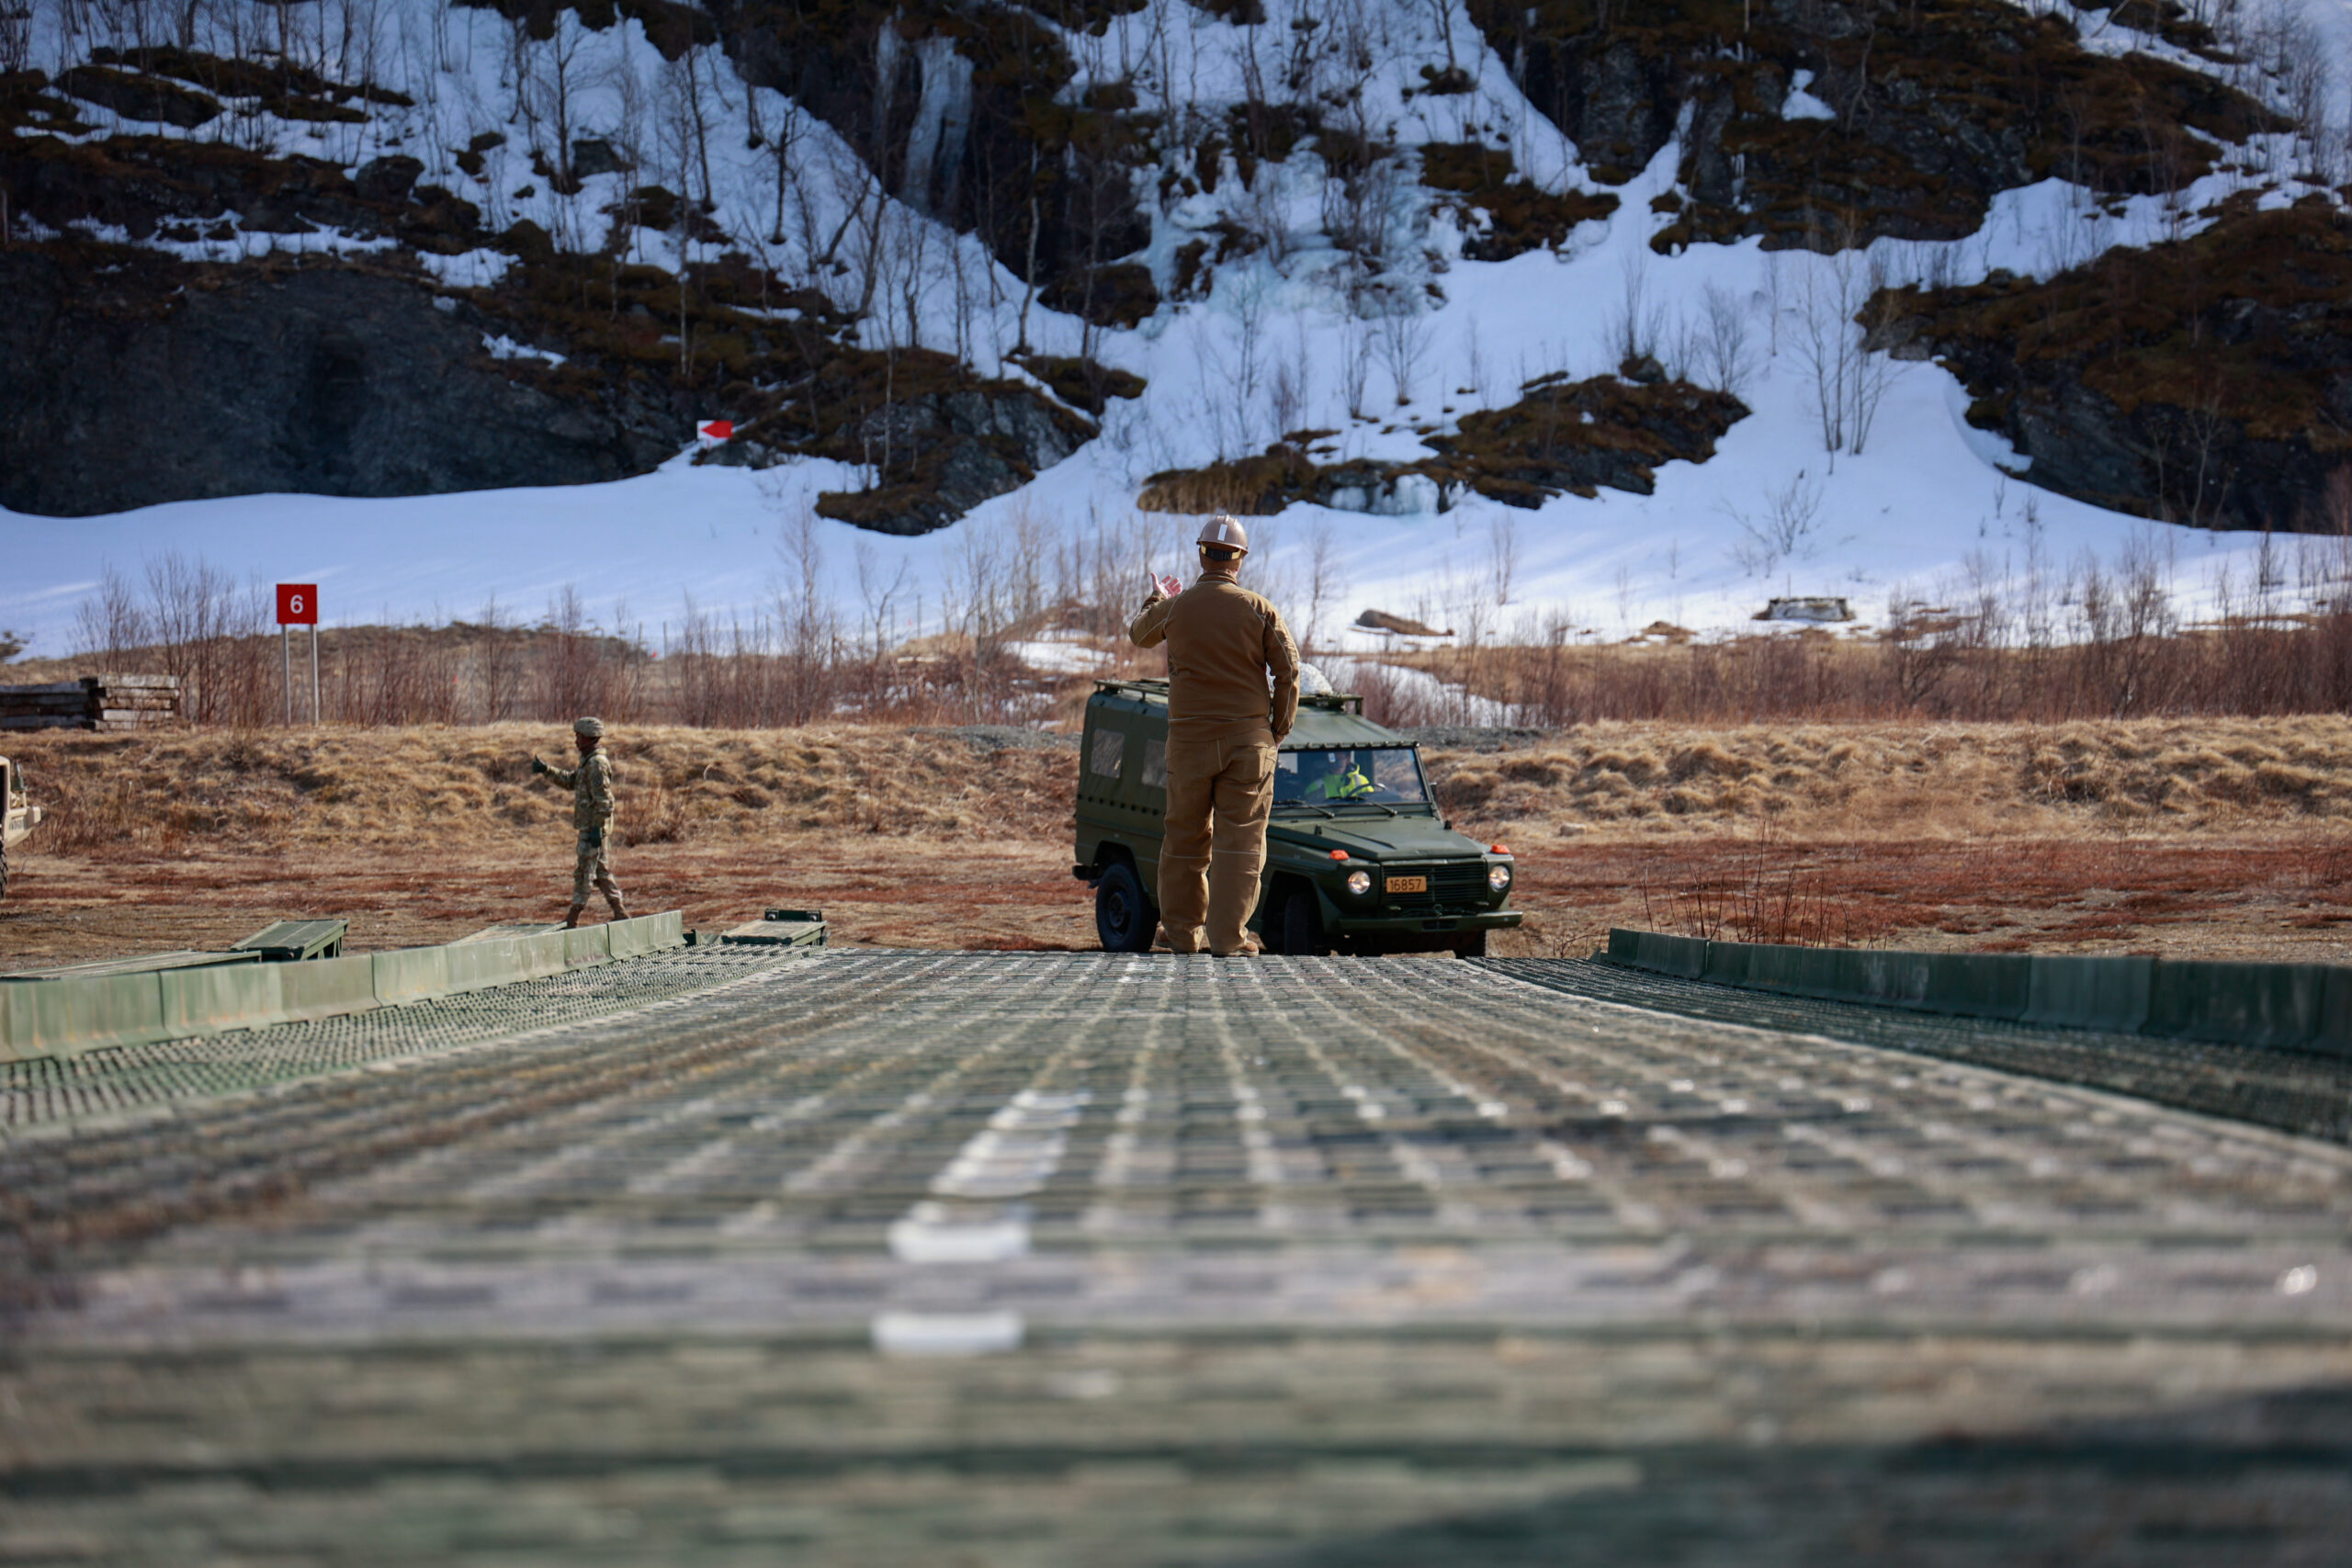 U.S. Navy Petty Officer 3rd Class Noah Sago, builder, Naval Mobile Construction Battalion 11, guides a Mercedes-Benz 240 GD across a medium girder bridge in Evenes, Norway, on April 26, 2024. As a part of DEFENDER 24, the U.S. Navy, U.S. Army, and Norwegian army stood up a medium girder bridge for the first time in Norway to test its functionality. Military exercises involving Allies and partner nations in the European theater remain an integral part of demonstrating readiness, interoperability, and capability. DEFENDER is the Dynamic Employment of Forces to Europe for NATO Deterrence and Enhanced Readiness, and is a U.S. European Command scheduled, U.S. Army Europe and Africa conducted exercise that consists of Saber Strike, Immediate Response, and Swift Response. DEFENDER 24 is linked to NATO’s Steadfast Defender exercise, and DoD’s Large Scale Global Exercise, taking place from 28 March to 31 May. DEFENDER 24 is the largest U.S. Army exercise in Europe and includes more than 17,000 U.S. and 23,000 multinational service members from more than 20 Allied and partner nations, including Croatia, Czechia, Denmark, Estonia, Finland, France, Germany, Georgia, Hungary, Italy, Latvia, Lithuania, Moldova, Netherlands, North Macedonia, Norway, Poland, Romania, Slovakia, Spain, Sweden, and the United Kingdom. (U.S. Army photo by Spc. Samuel Signor)